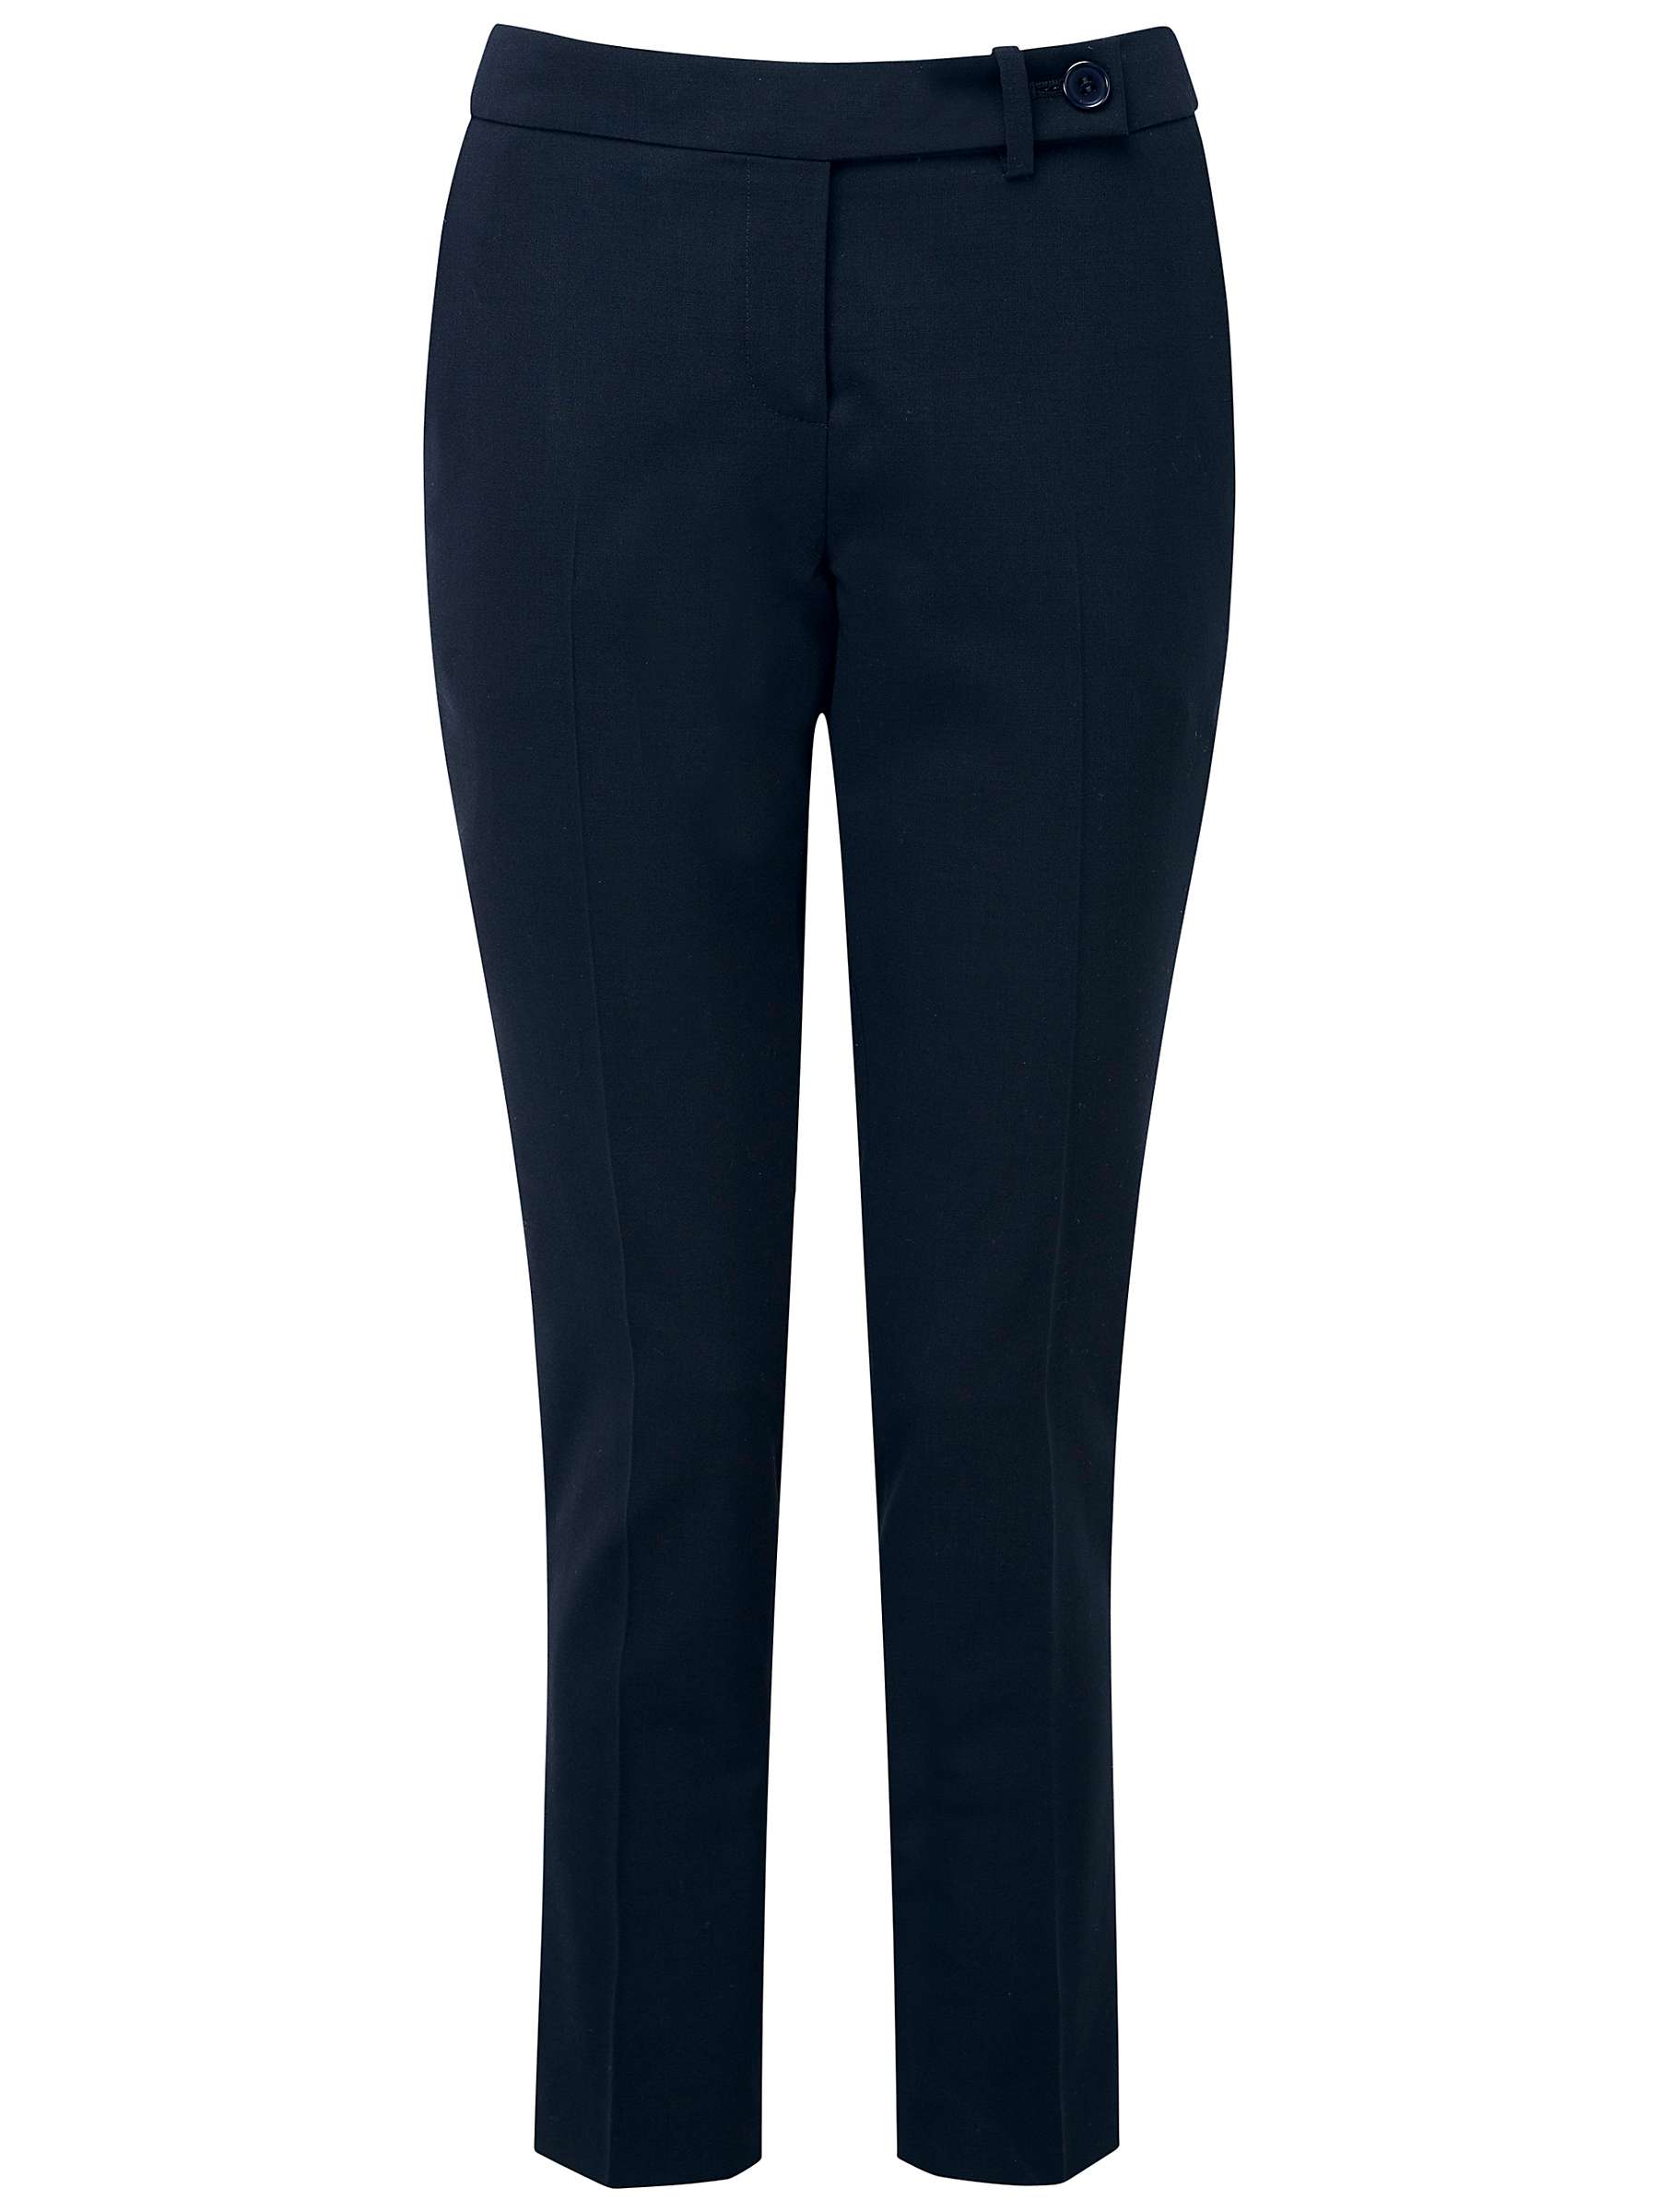 Buy Pure Collection Tailored Ankle Length Trousers Online at johnlewis.com